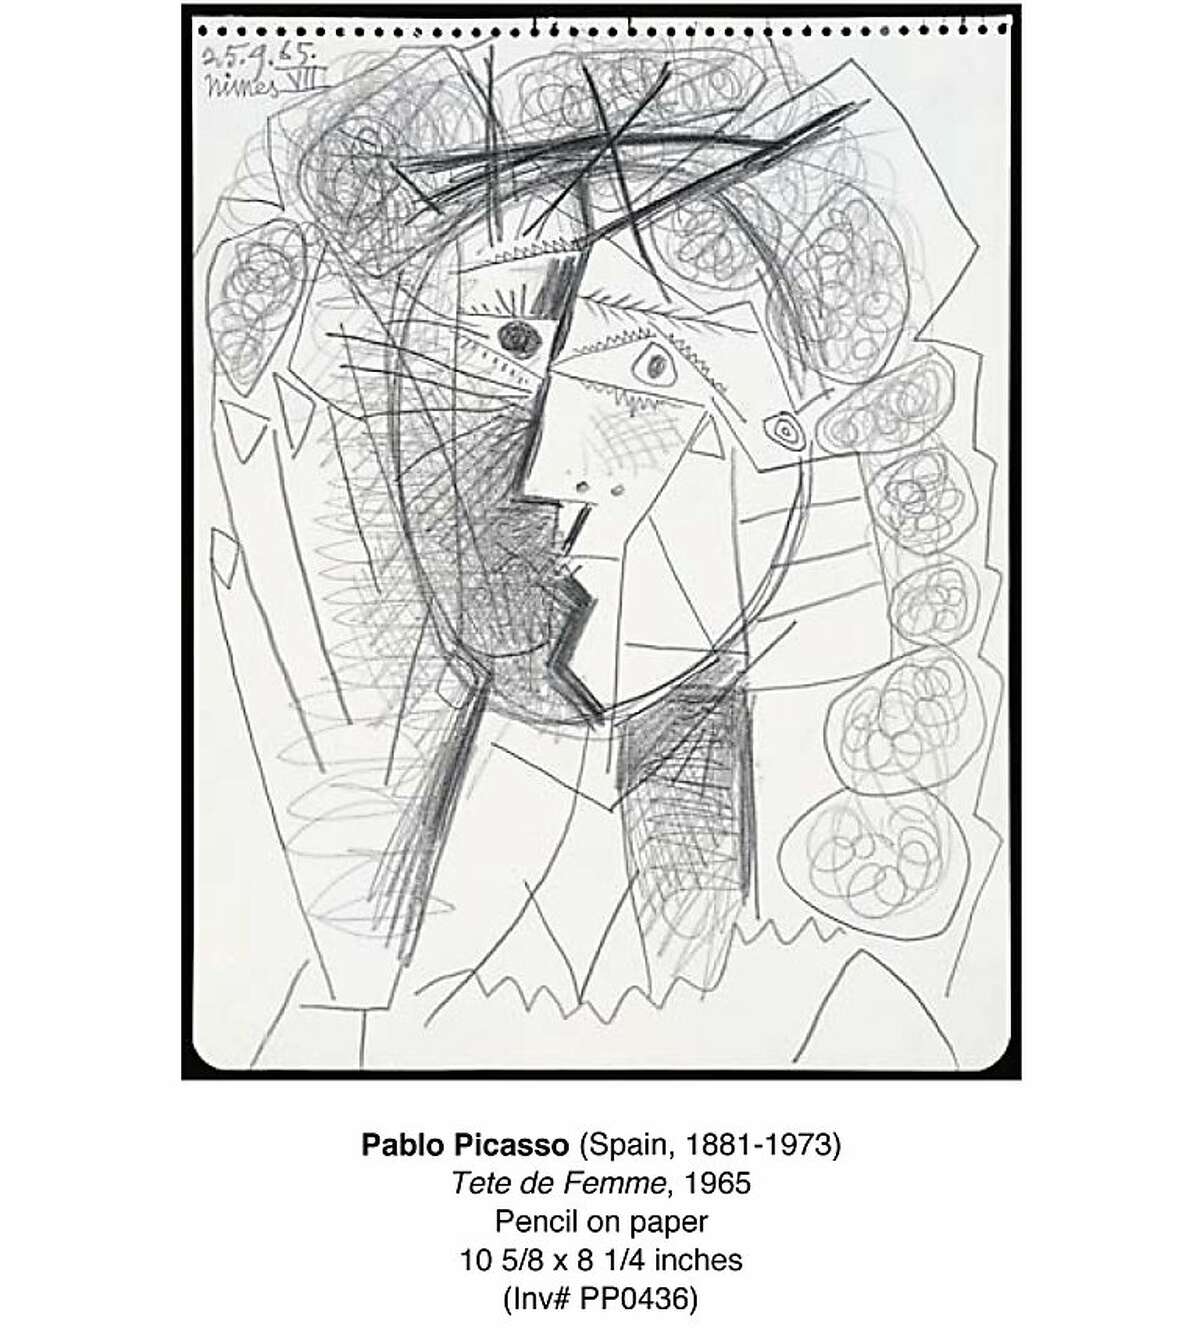 "Tete de Femme," a 1965 drawing by Pablo Picasso that was stolen July 5, 2011, from the Weinstein Gallery in San Francisco.